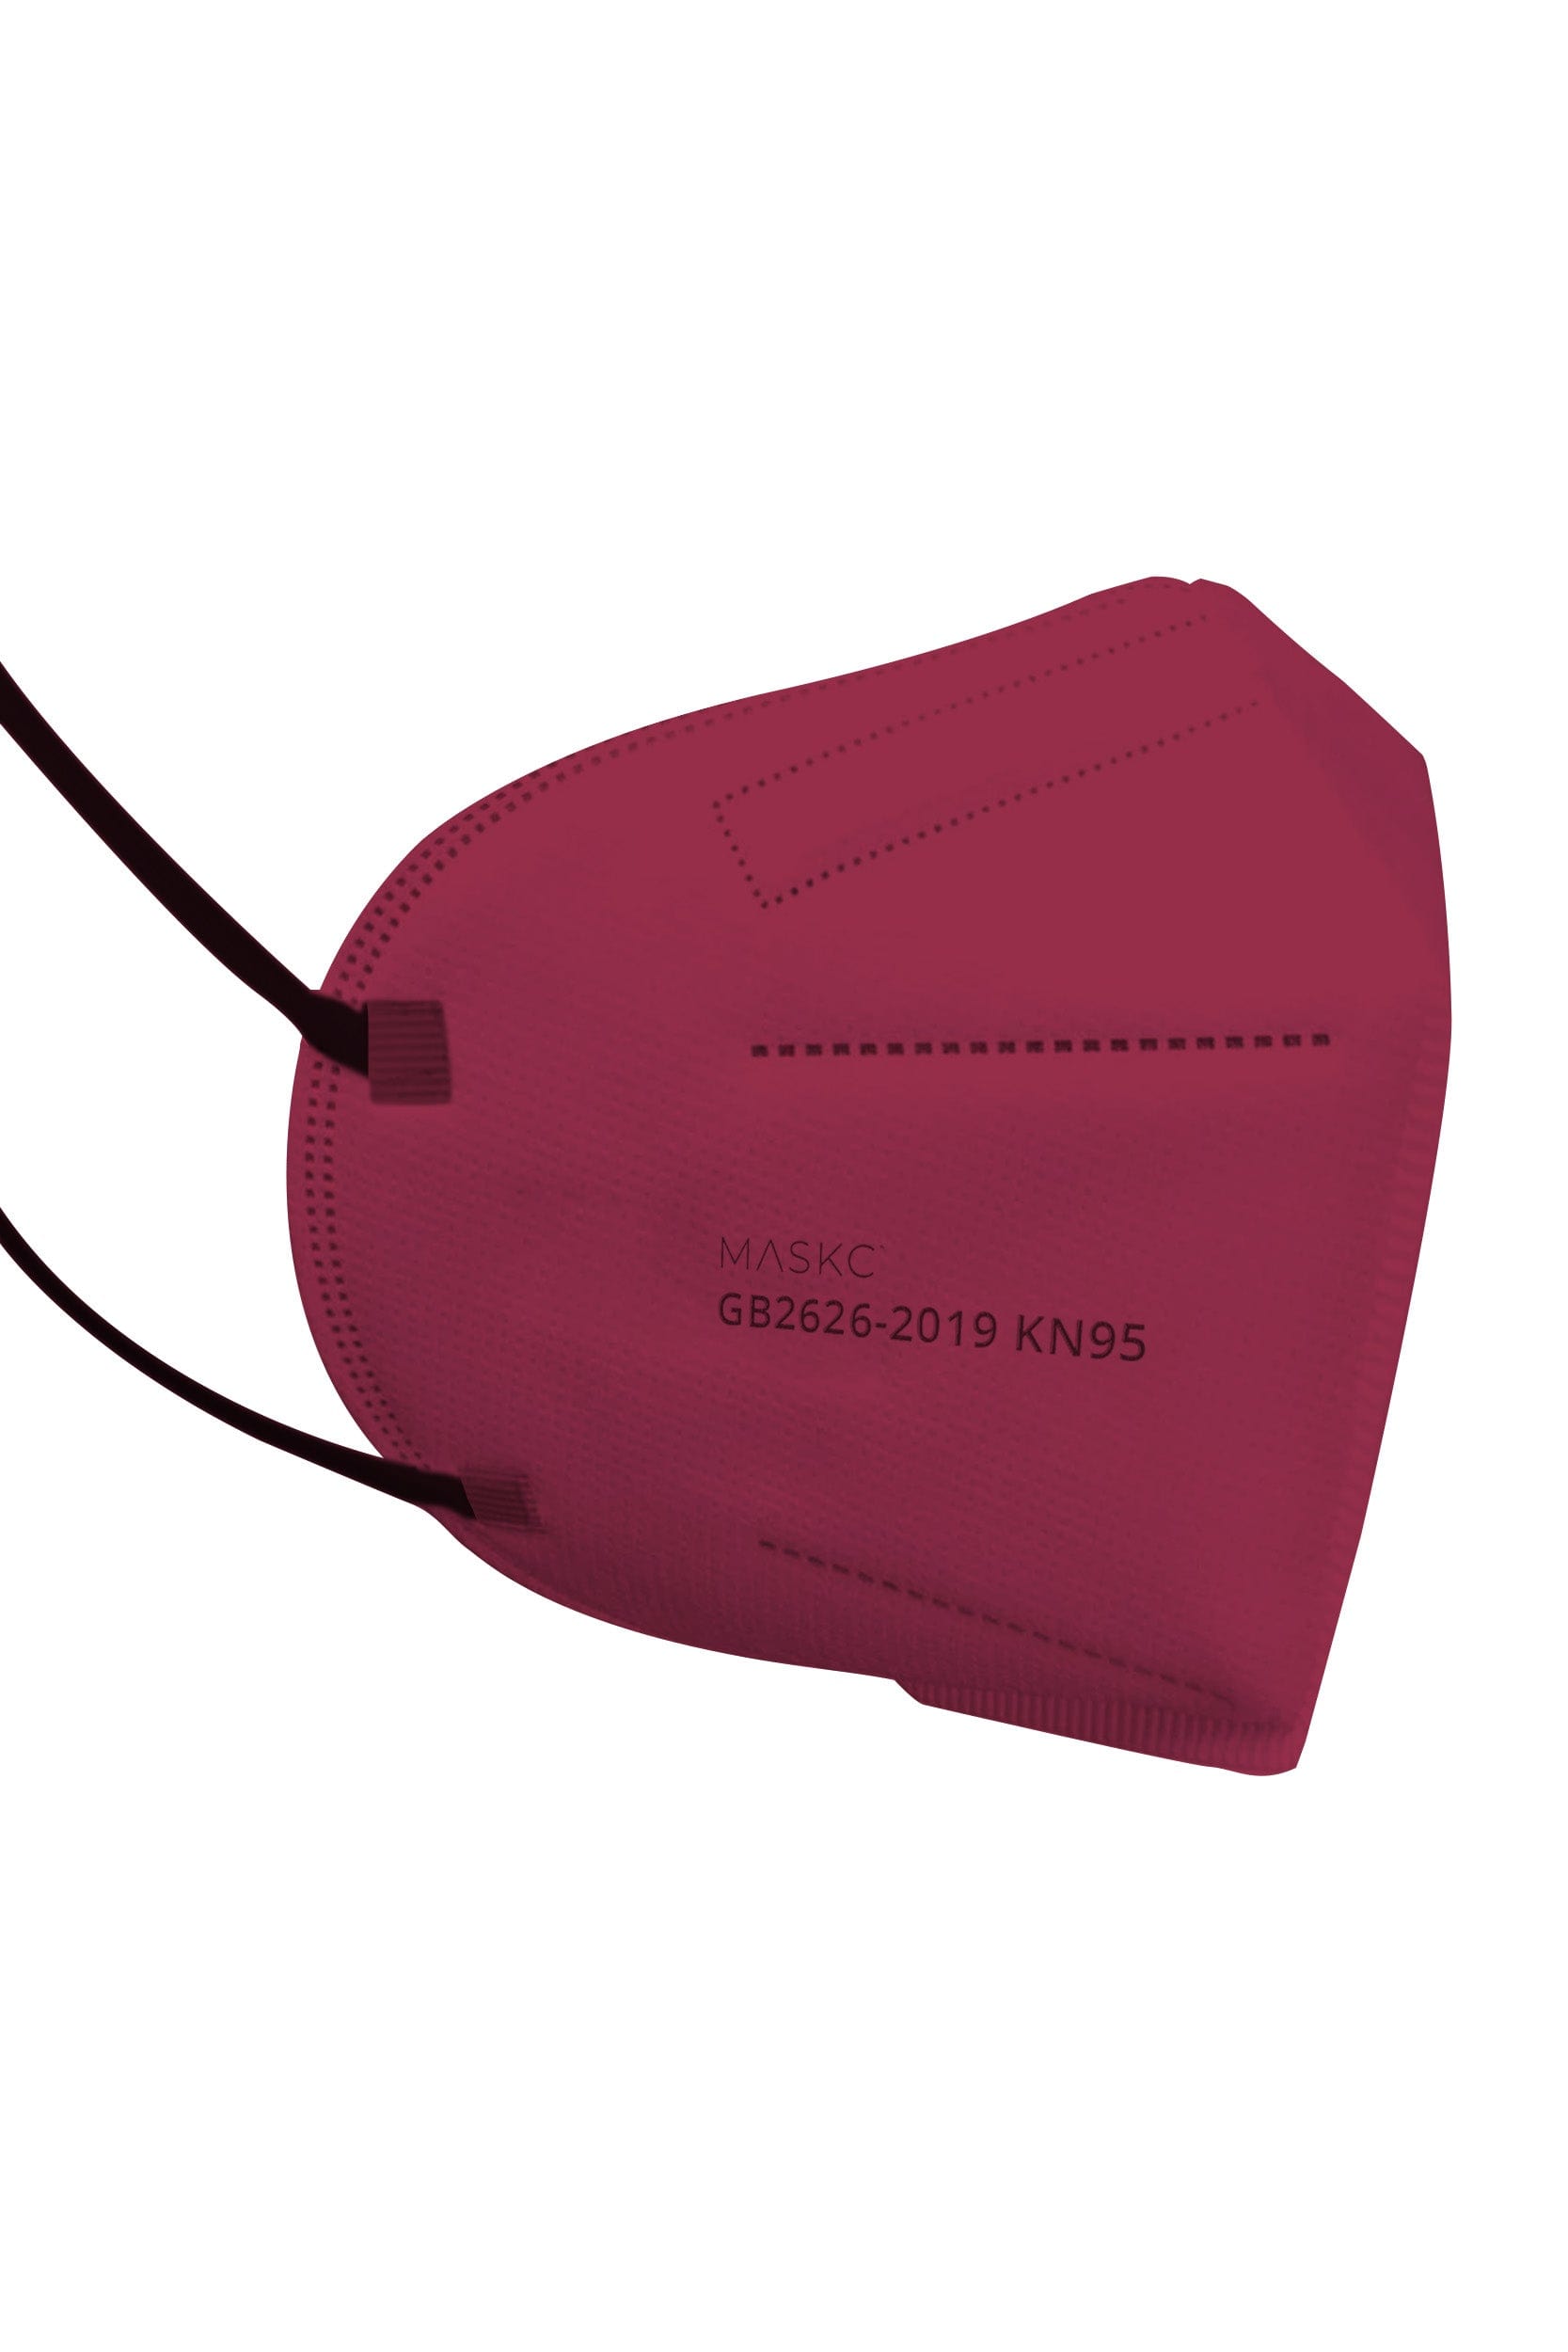 Stylish deep red KN95 face mask, with soft black ear loops and high quality fabric. 